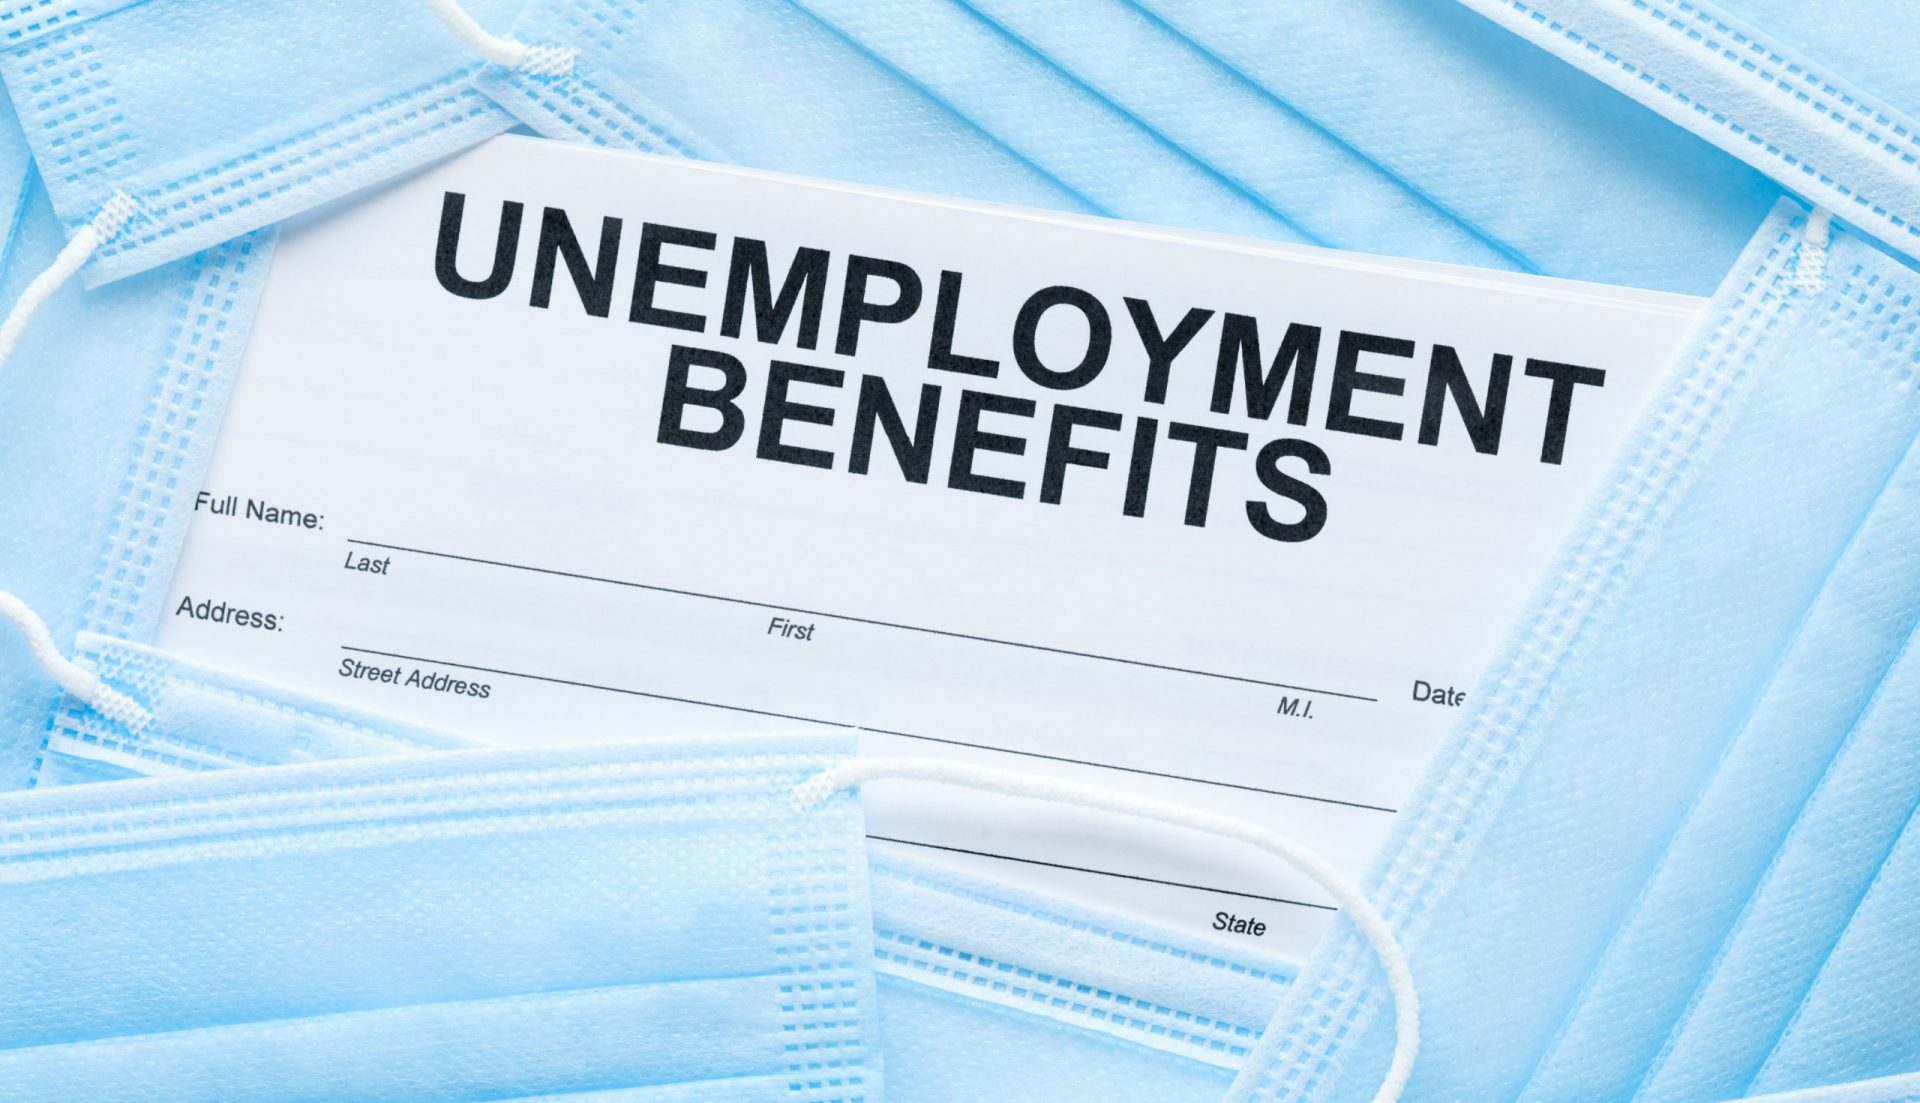 What Can Disqualify You From Unemployment Benefits?